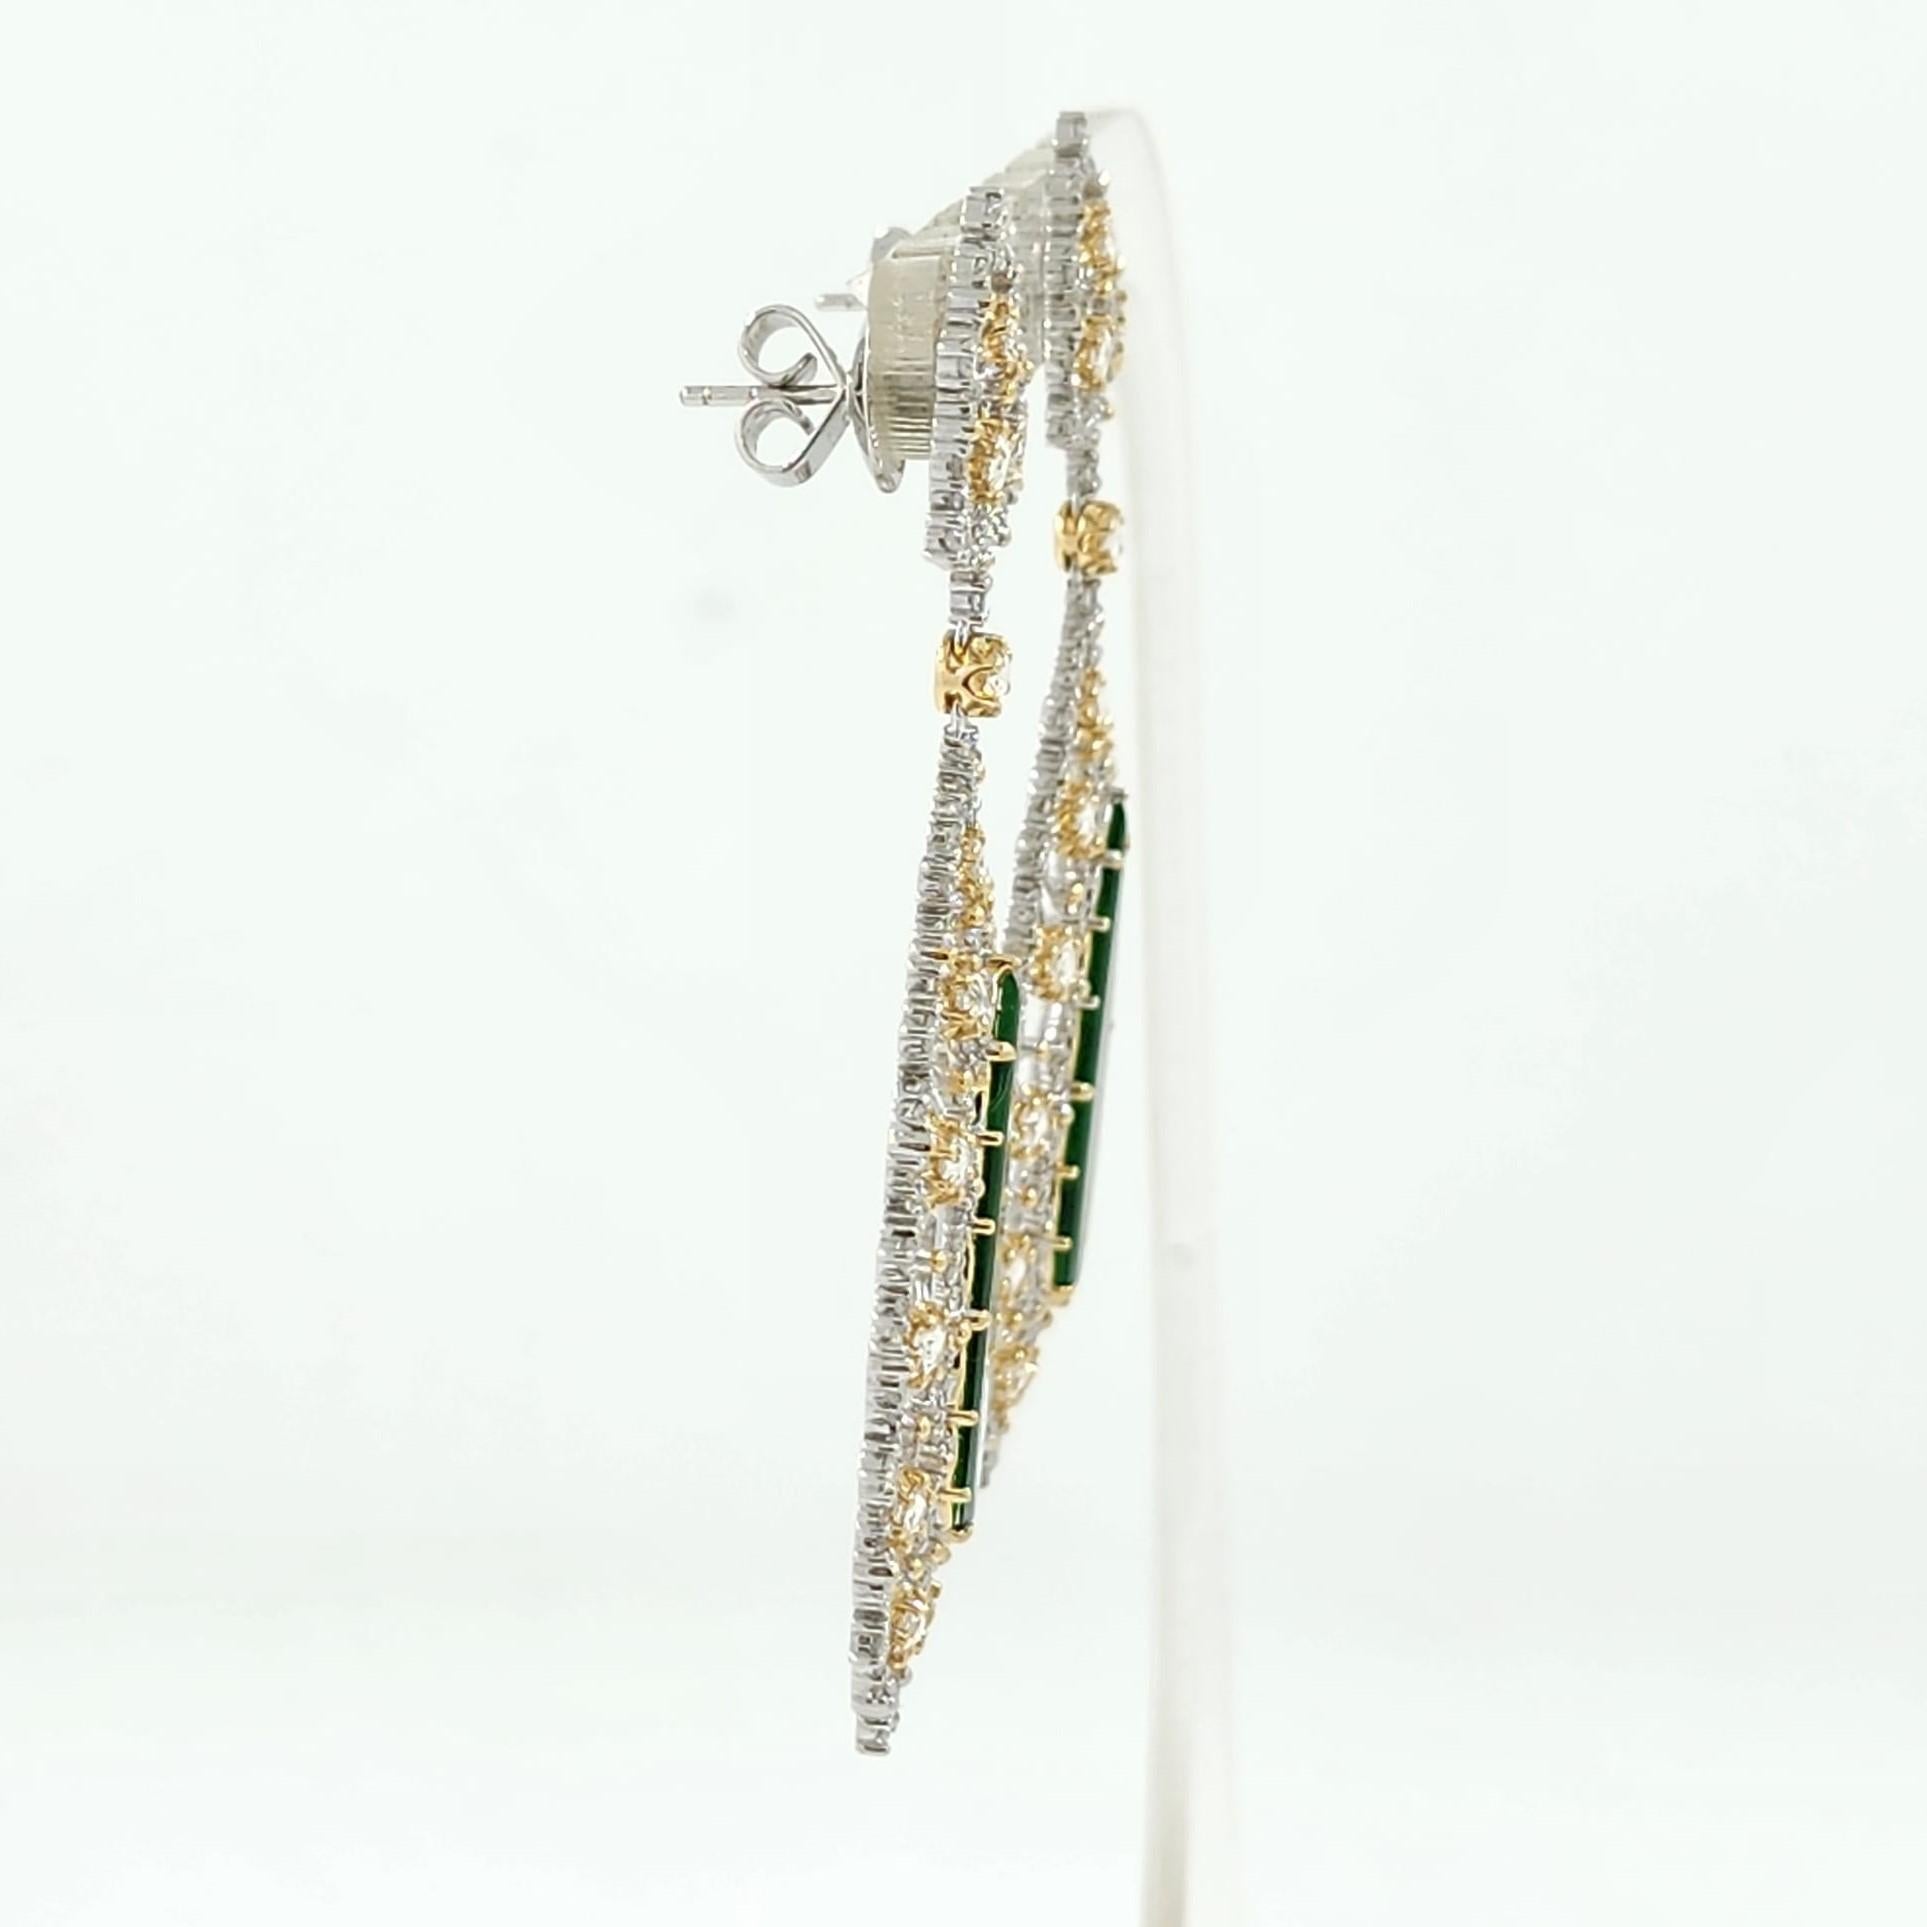 Contemporary Vintage 6.54 Total Carat Jadeite and Diamond Drop Earring in 18 Karat Gold For Sale